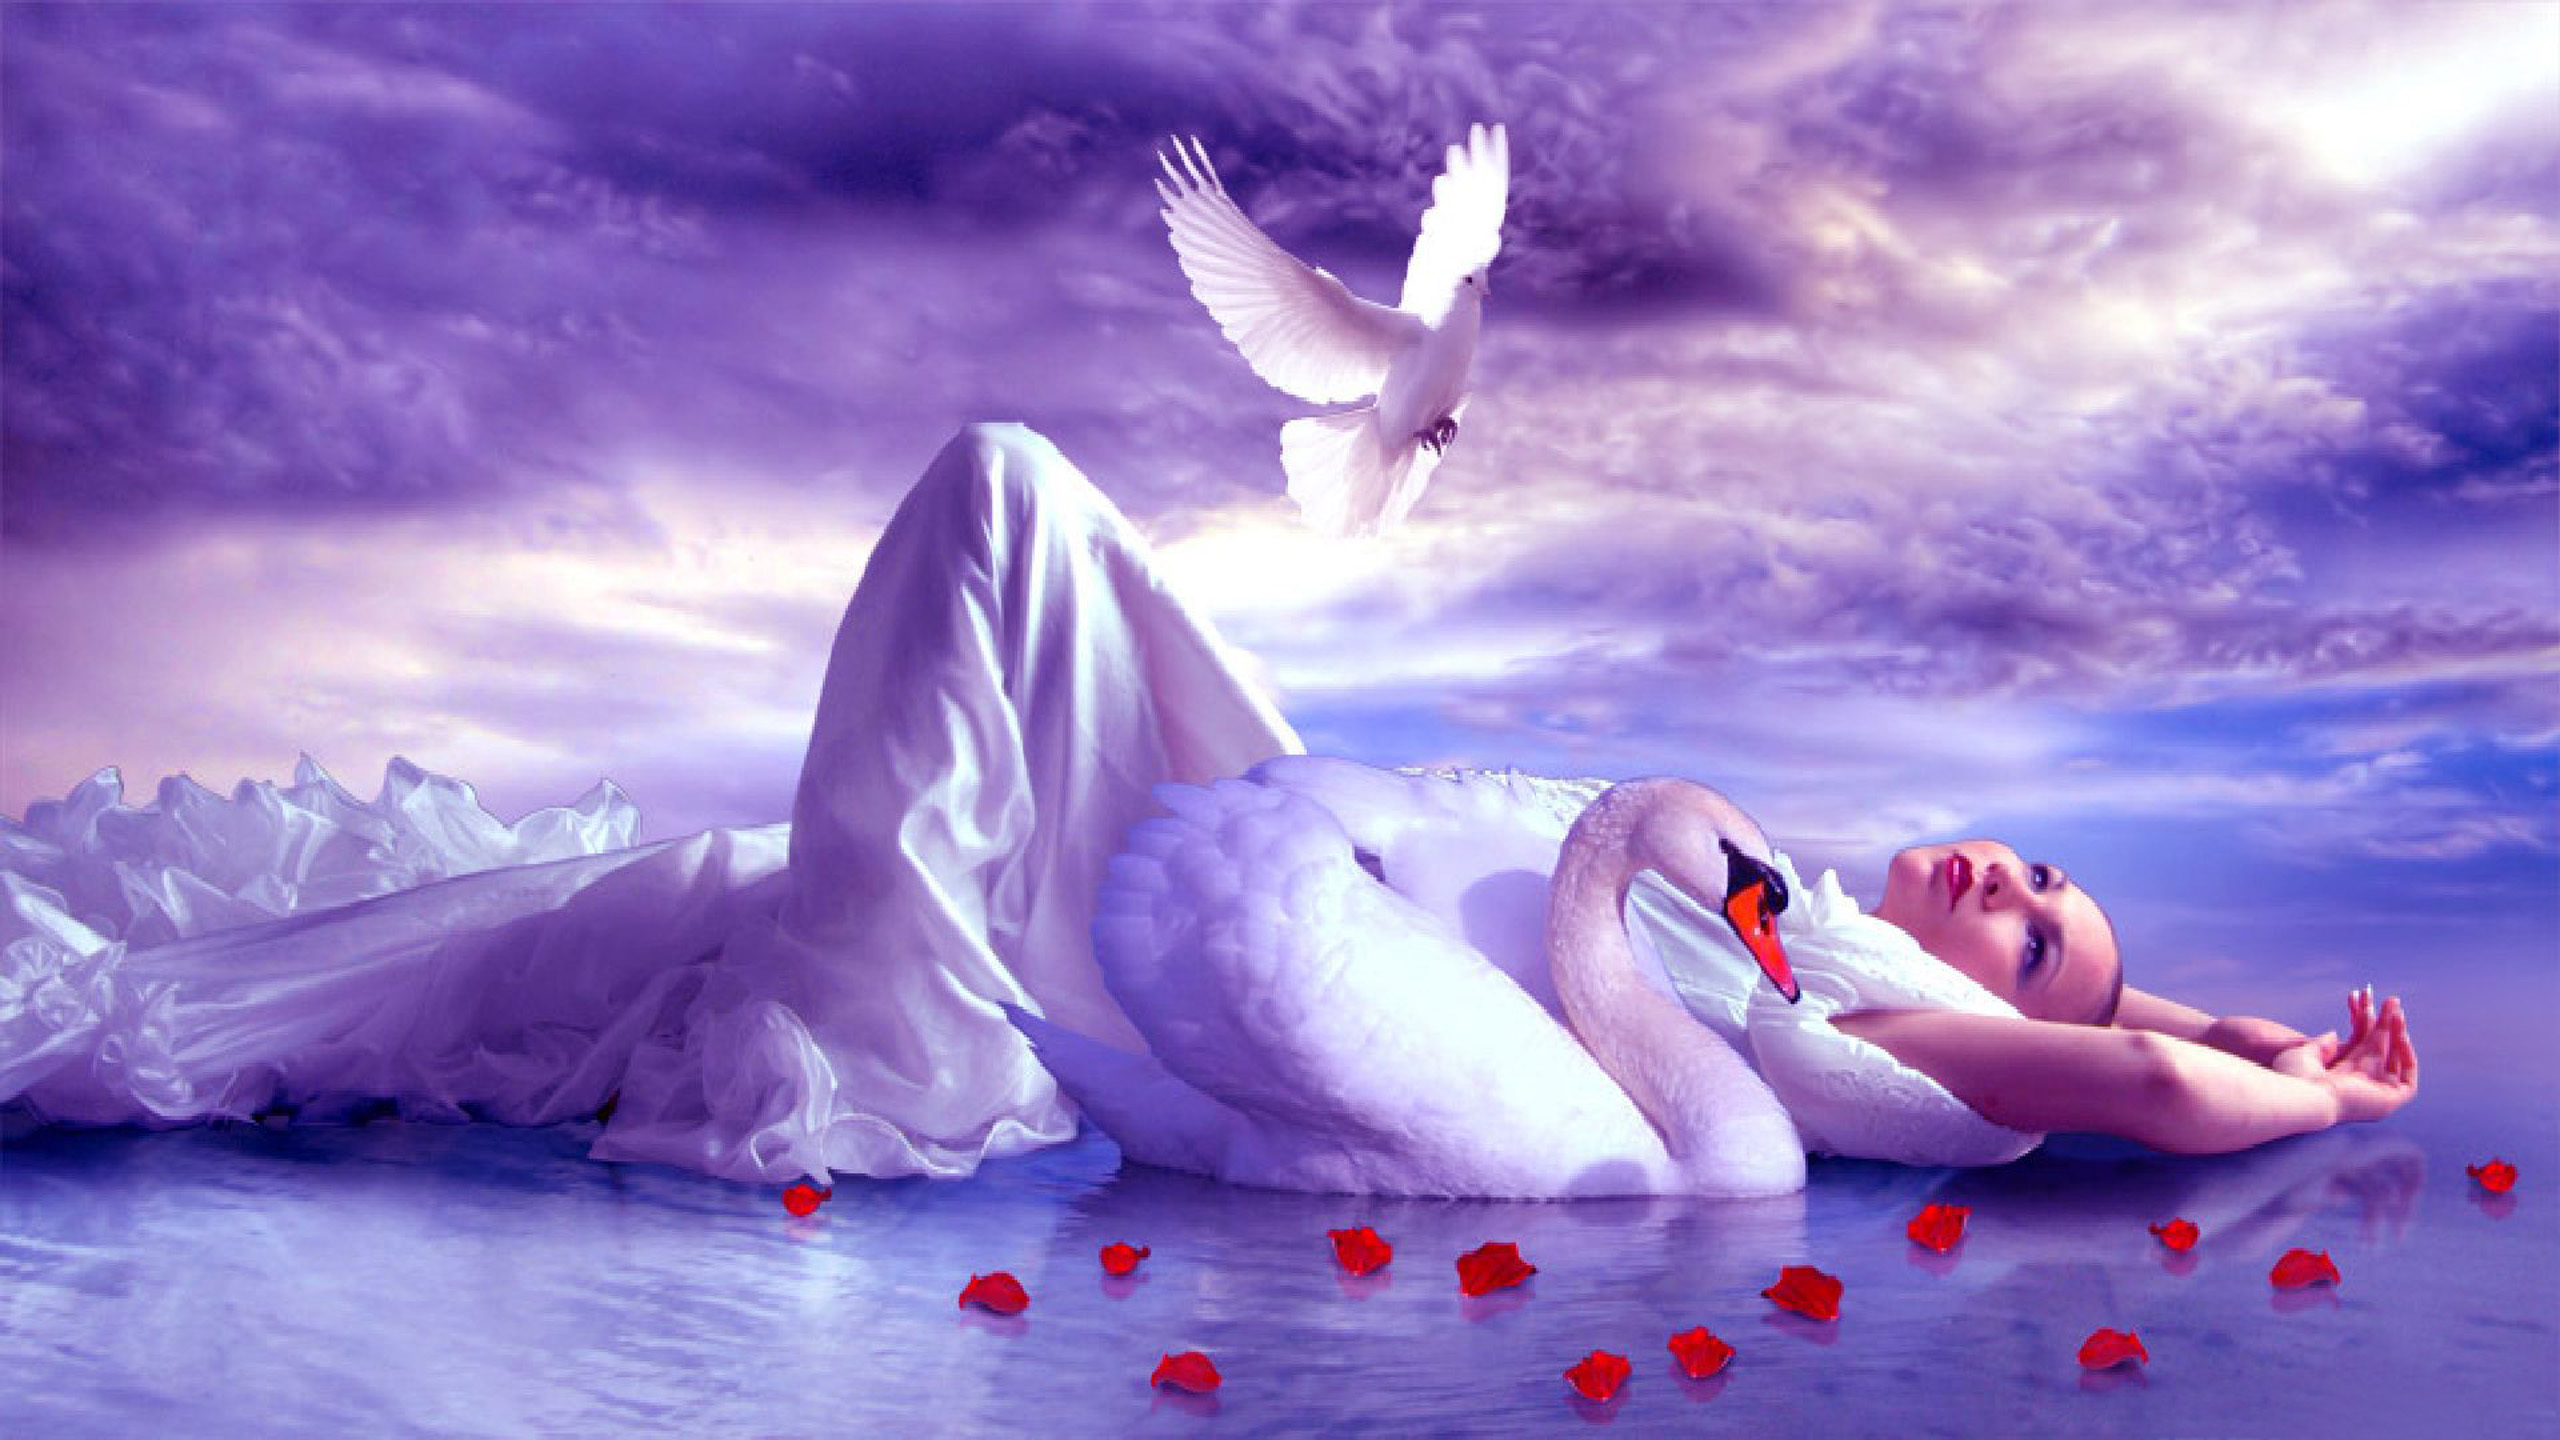 Girl Lake Accompaniment Of A Swan And Golub Sky With White Clouds Red